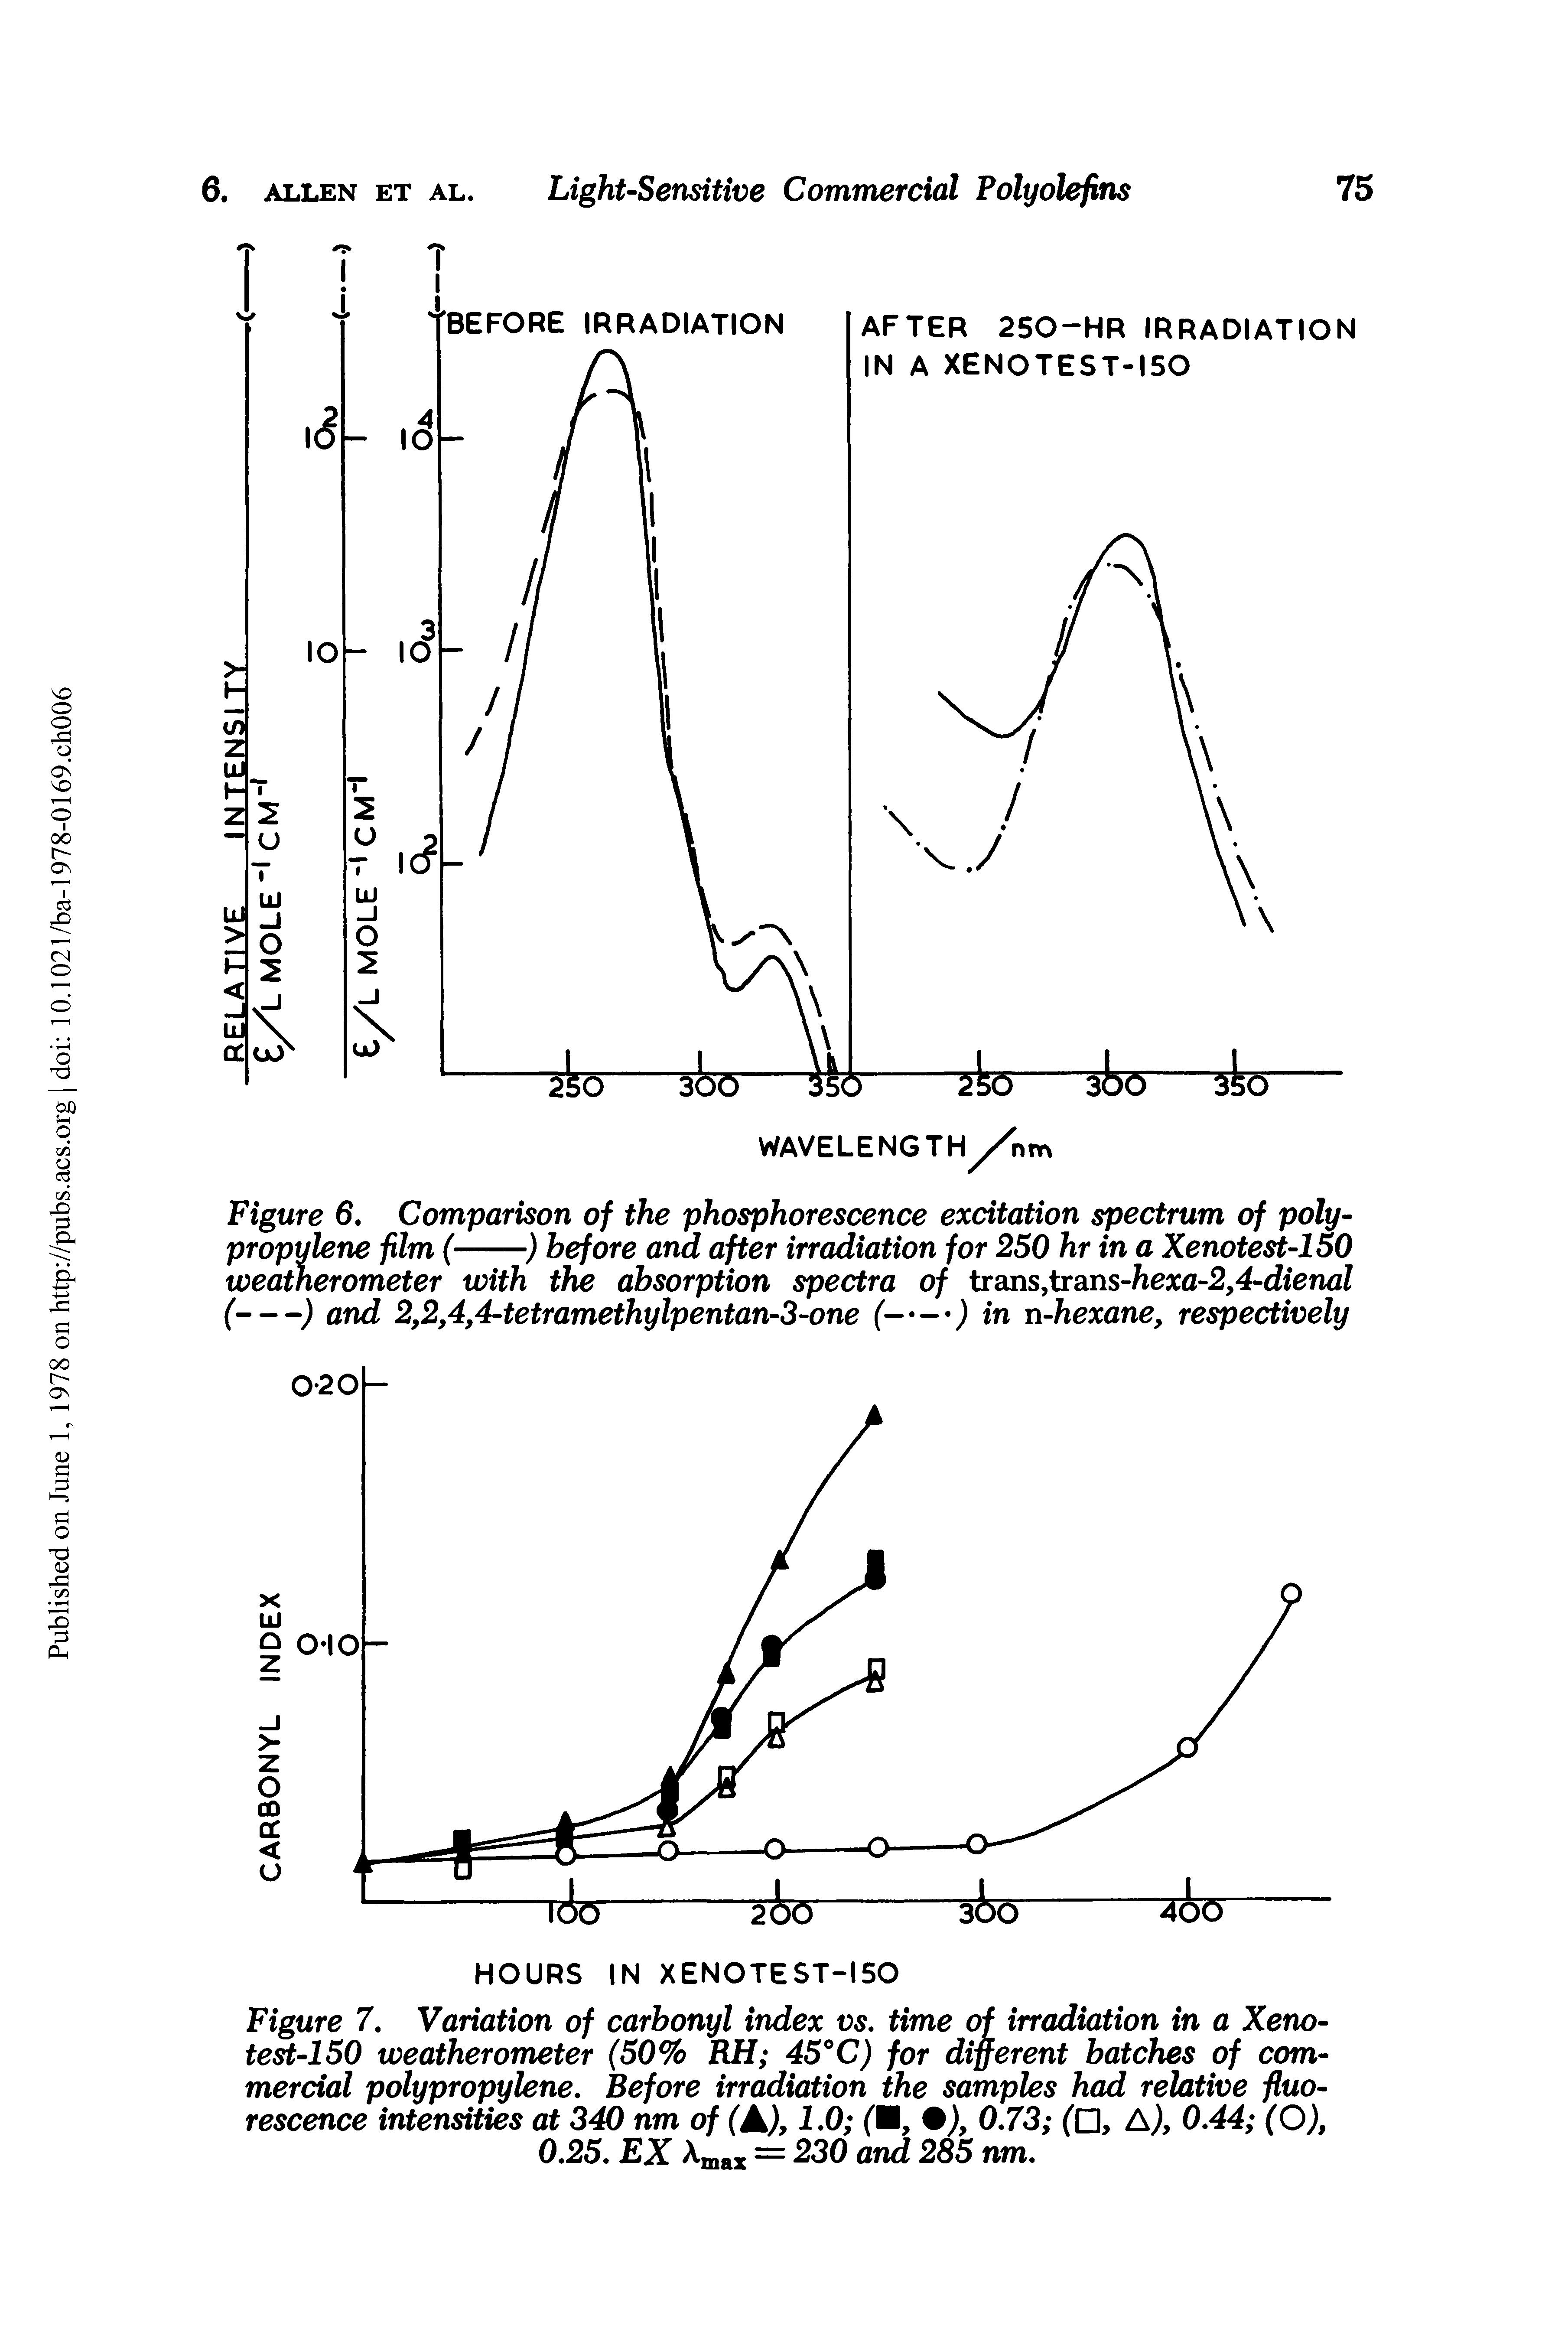 Figure 7. Variation of carbonyl index vs. time of irradiation in a Xenotest-150 weatherometer (50% RH 45°C) for different batches of commercial polypropylene. Before irradiation the samples had relative fluorescence intensities at 340 nm of (A), 1.0 ( , ), 0.73 ( , A), 0.44 (O), 0.25. EX Amax = 230 and 285 nm.